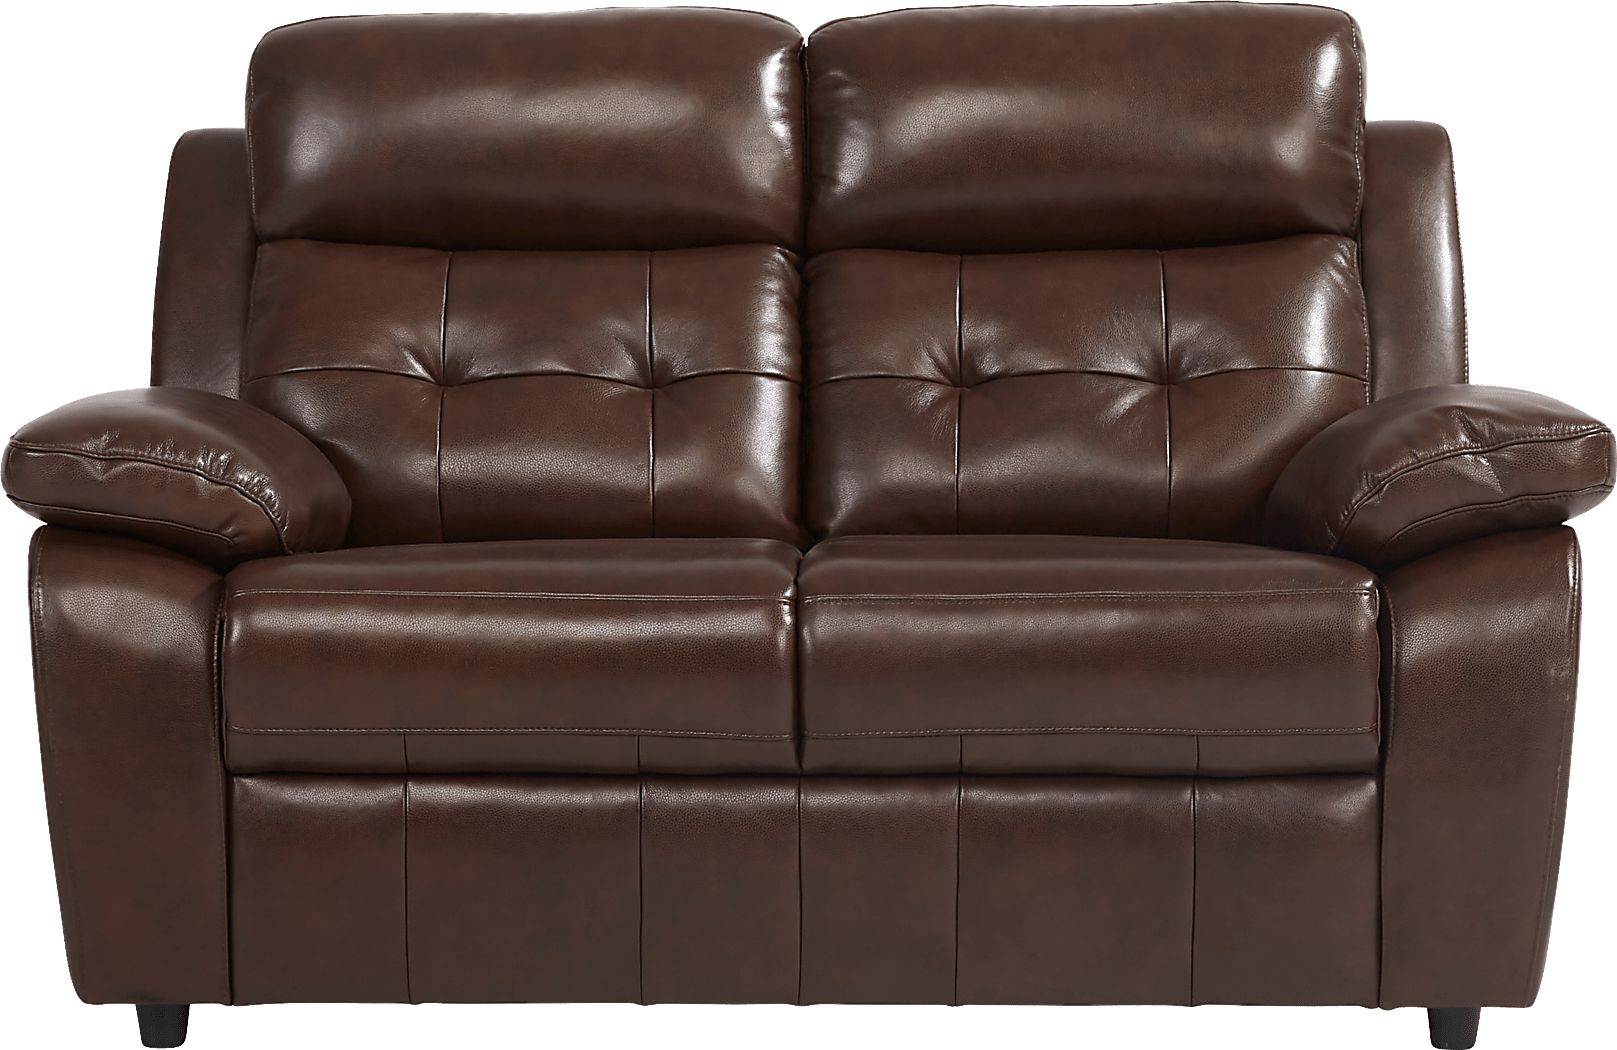 Antonin Brown Leather 7 Pc Living Room with Reclining Sofa